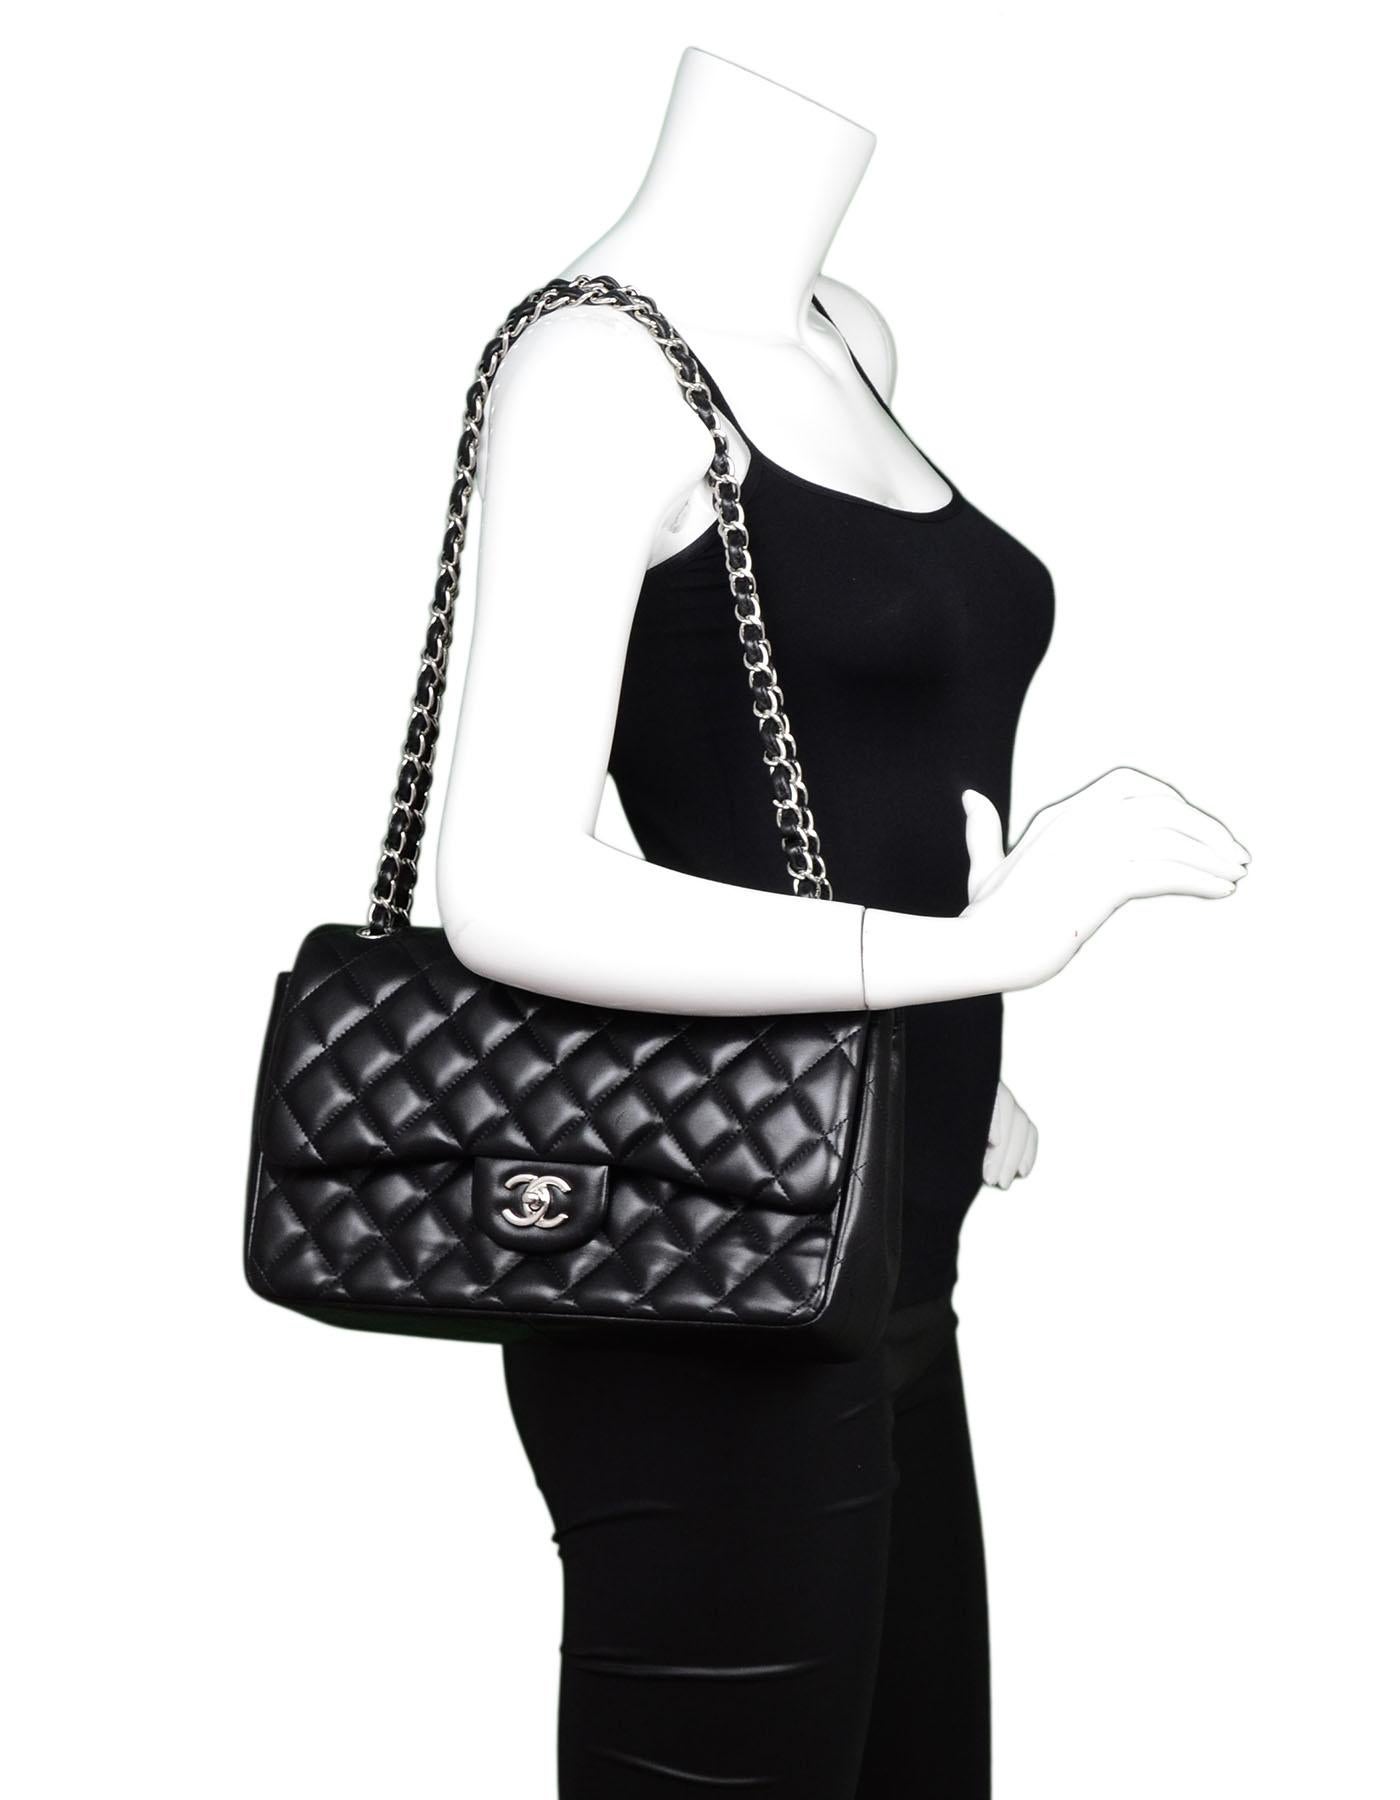 Chanel Black Quilted Lambskin Jumbo Double Flap Bag 

Made In: Italy
Year of Production: 2012
Color: Black
Hardware: Silverotne
Materials: Lambskin leather, metal
Lining: Burgundy leather
Closure/opening: Double flap top with snap closure and CC